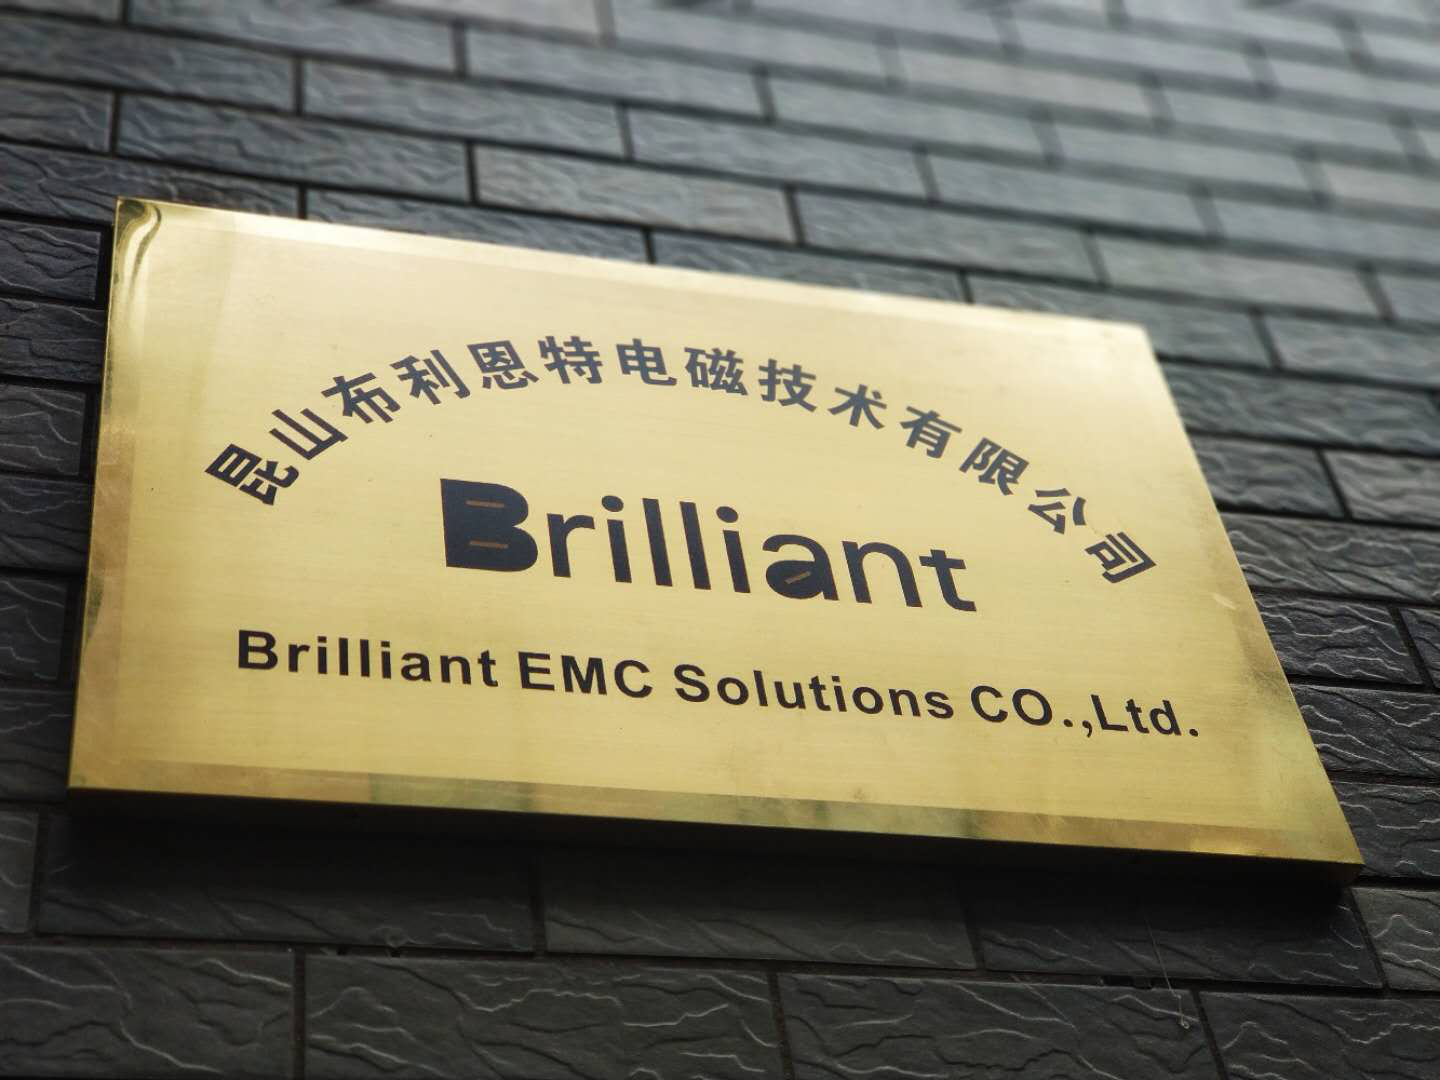 May 15, 2018, Brilliant EMC Solutions Co., Ltd. was formally (图1)